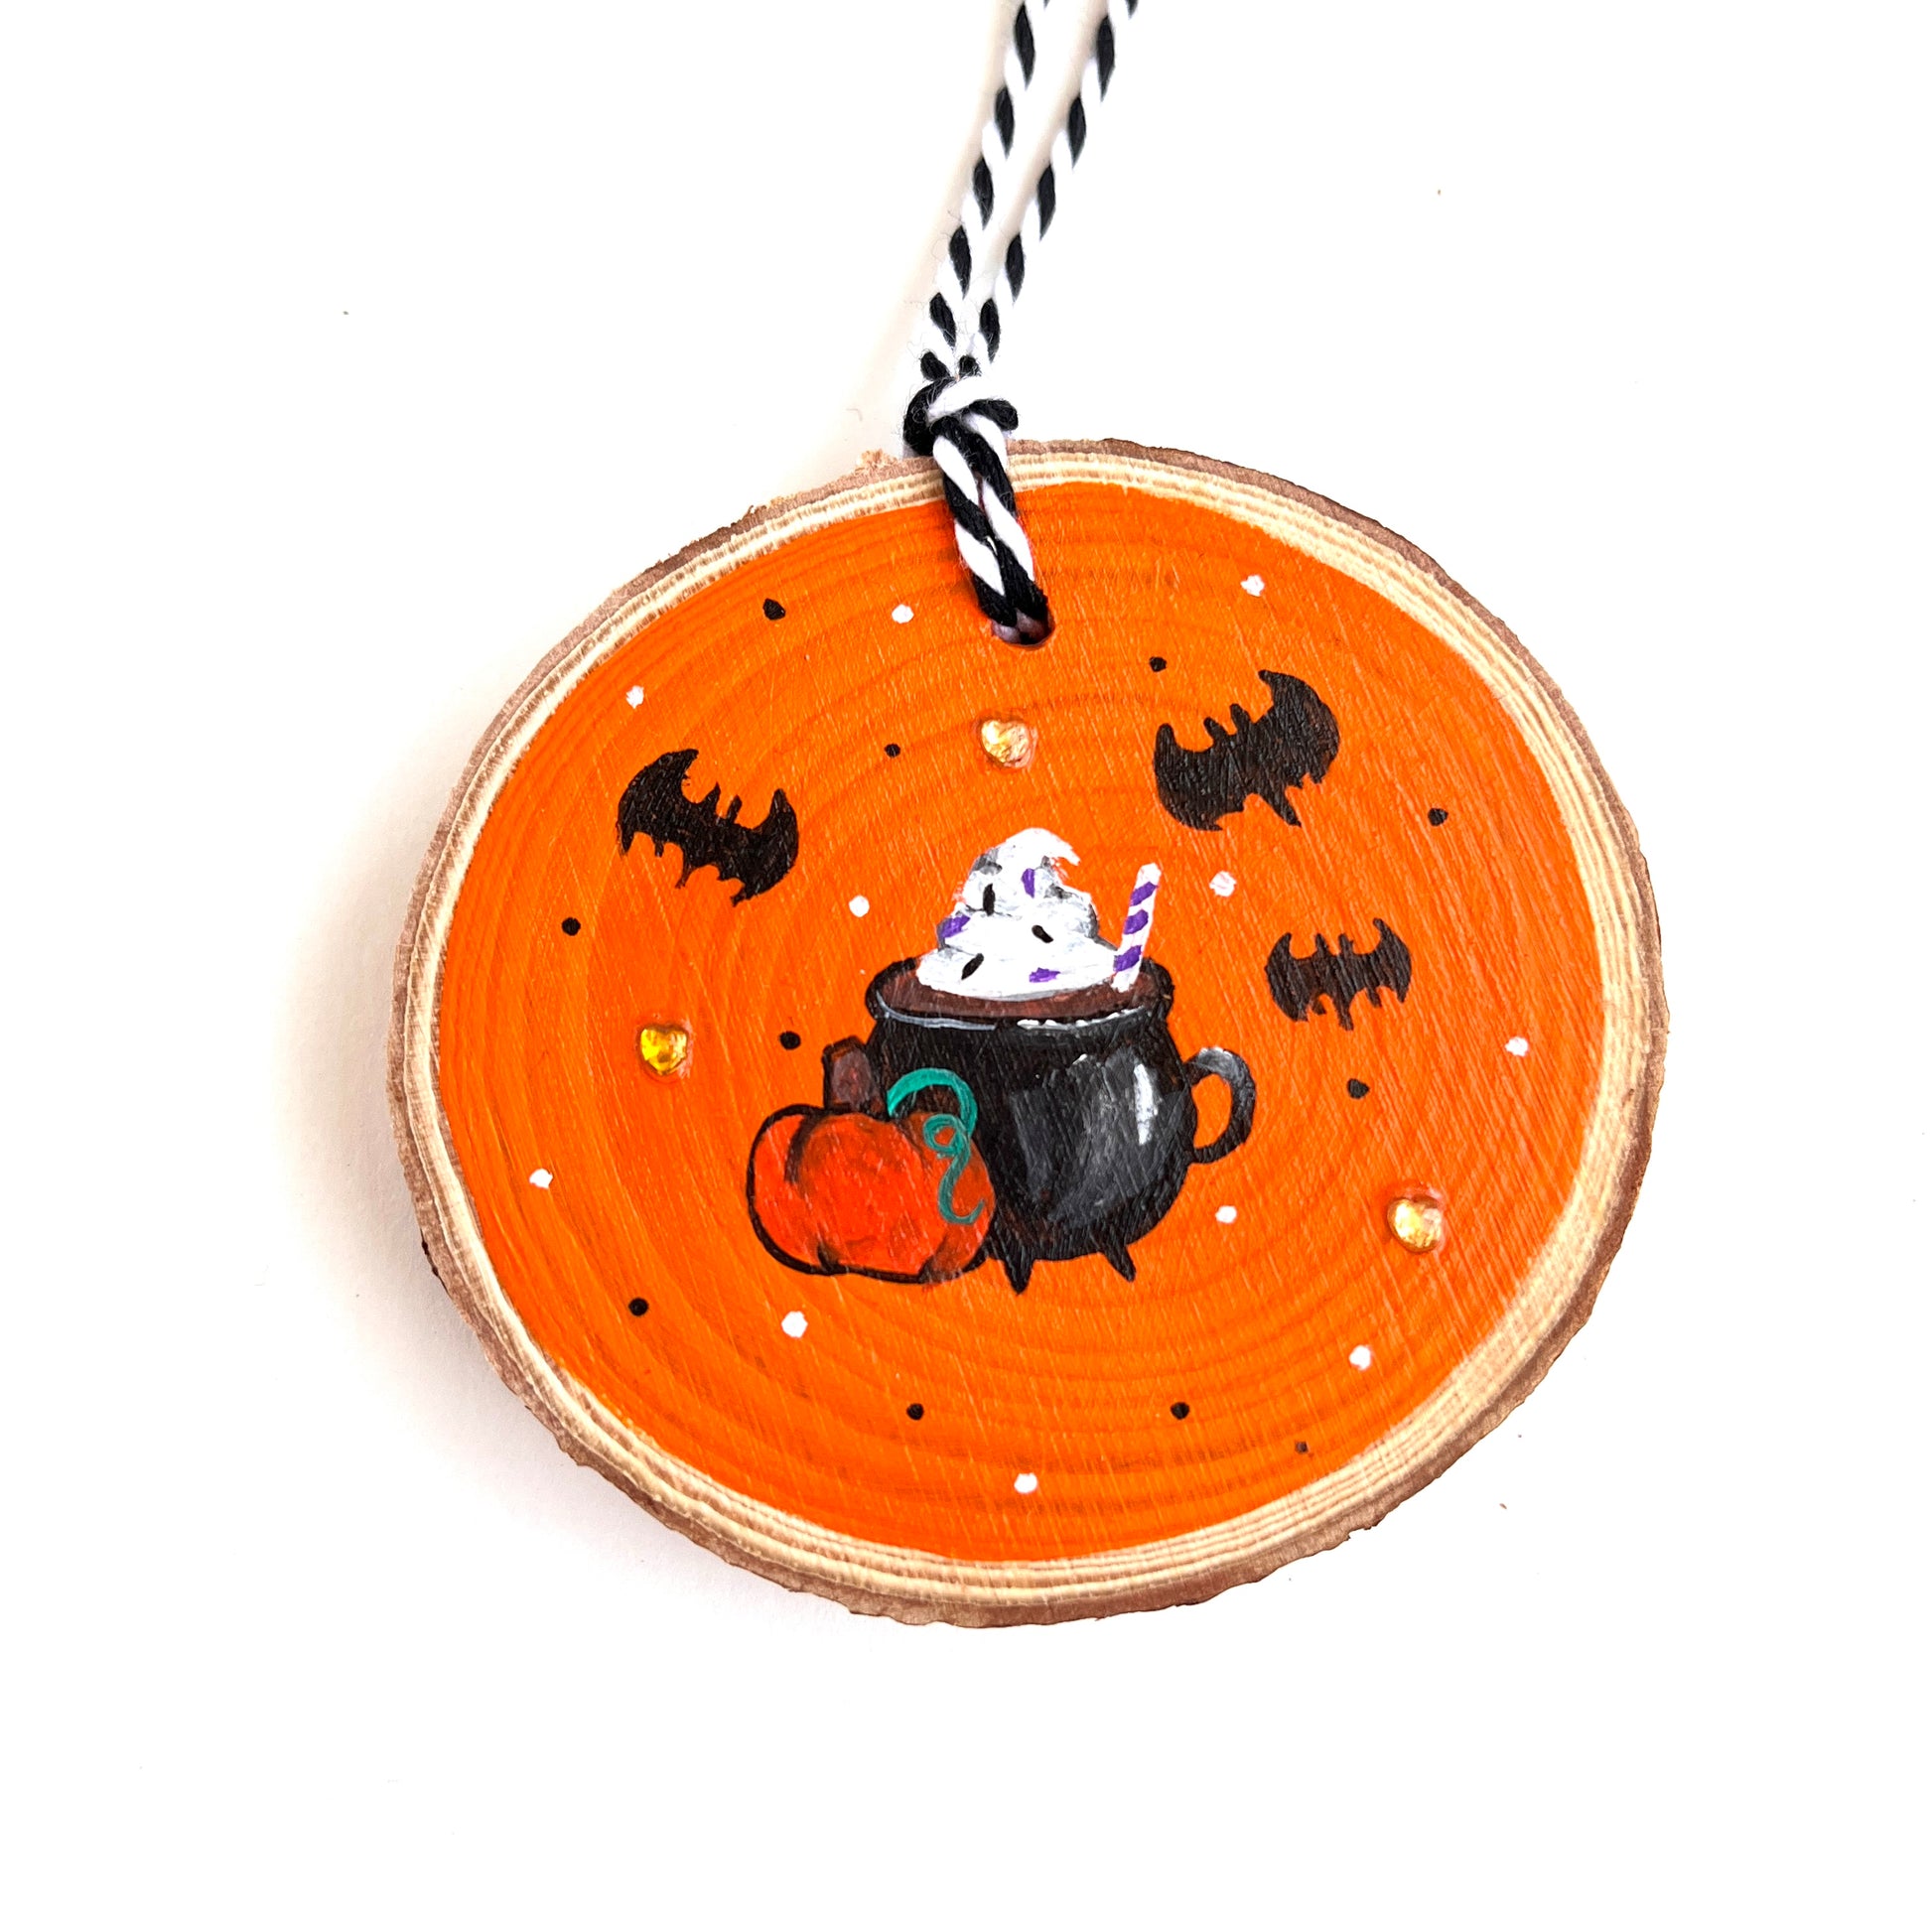 wooden ornament with halloween inspired pumpkin spice latte with bats floating around the cauldron mug. A small pumpkin sits in front of the mug and there are orange heart rhinestones decorating the background.